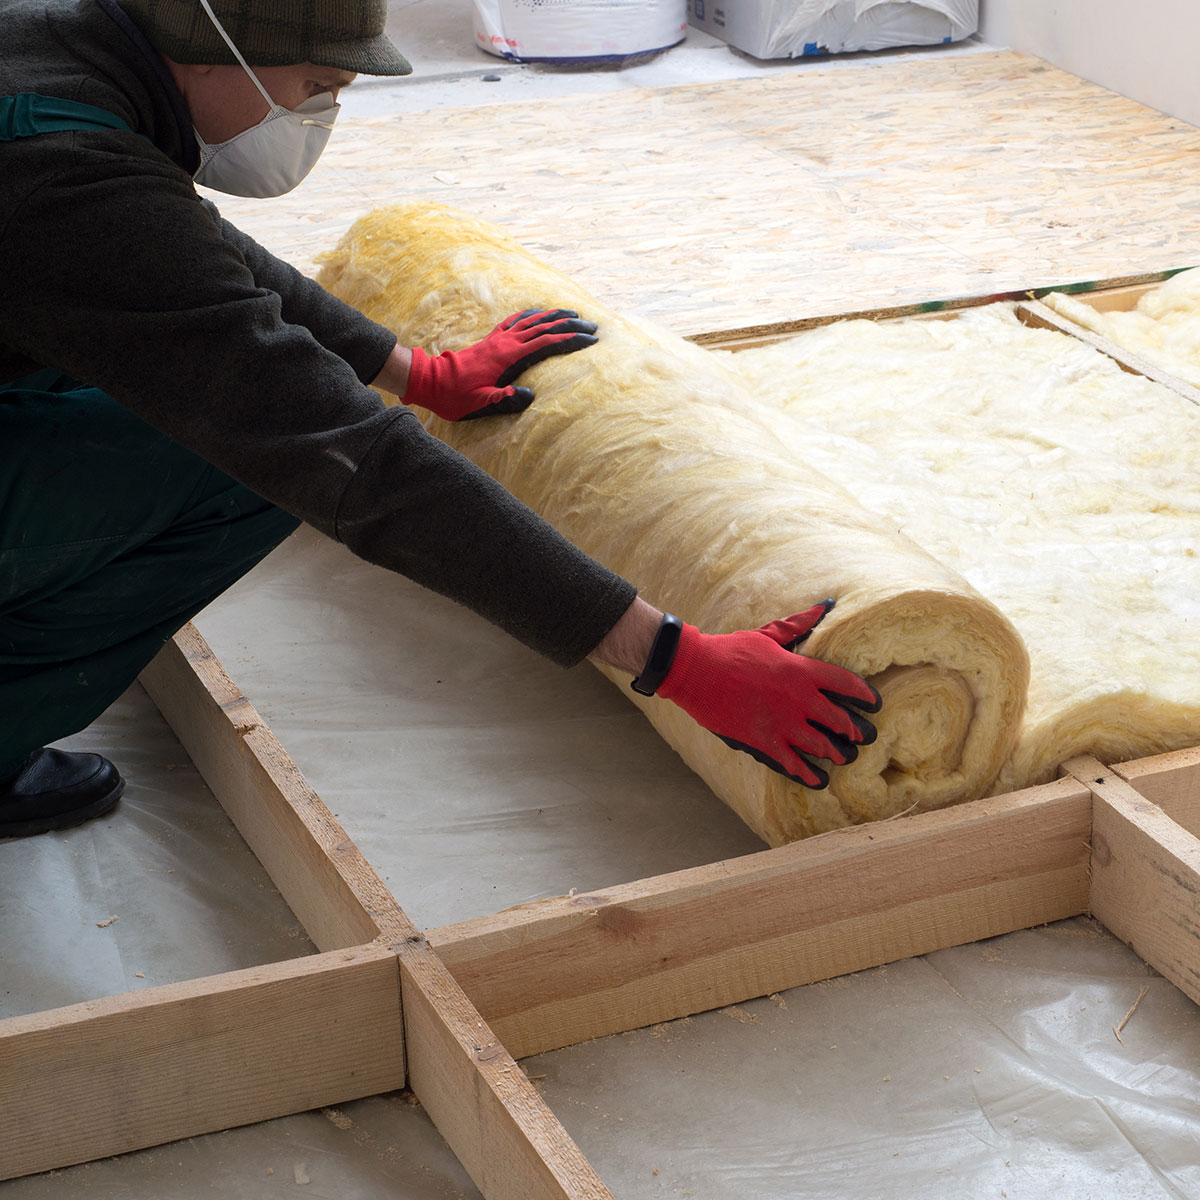 A49ad6ee Installing Insulation Residential Shutterstock 794575294 